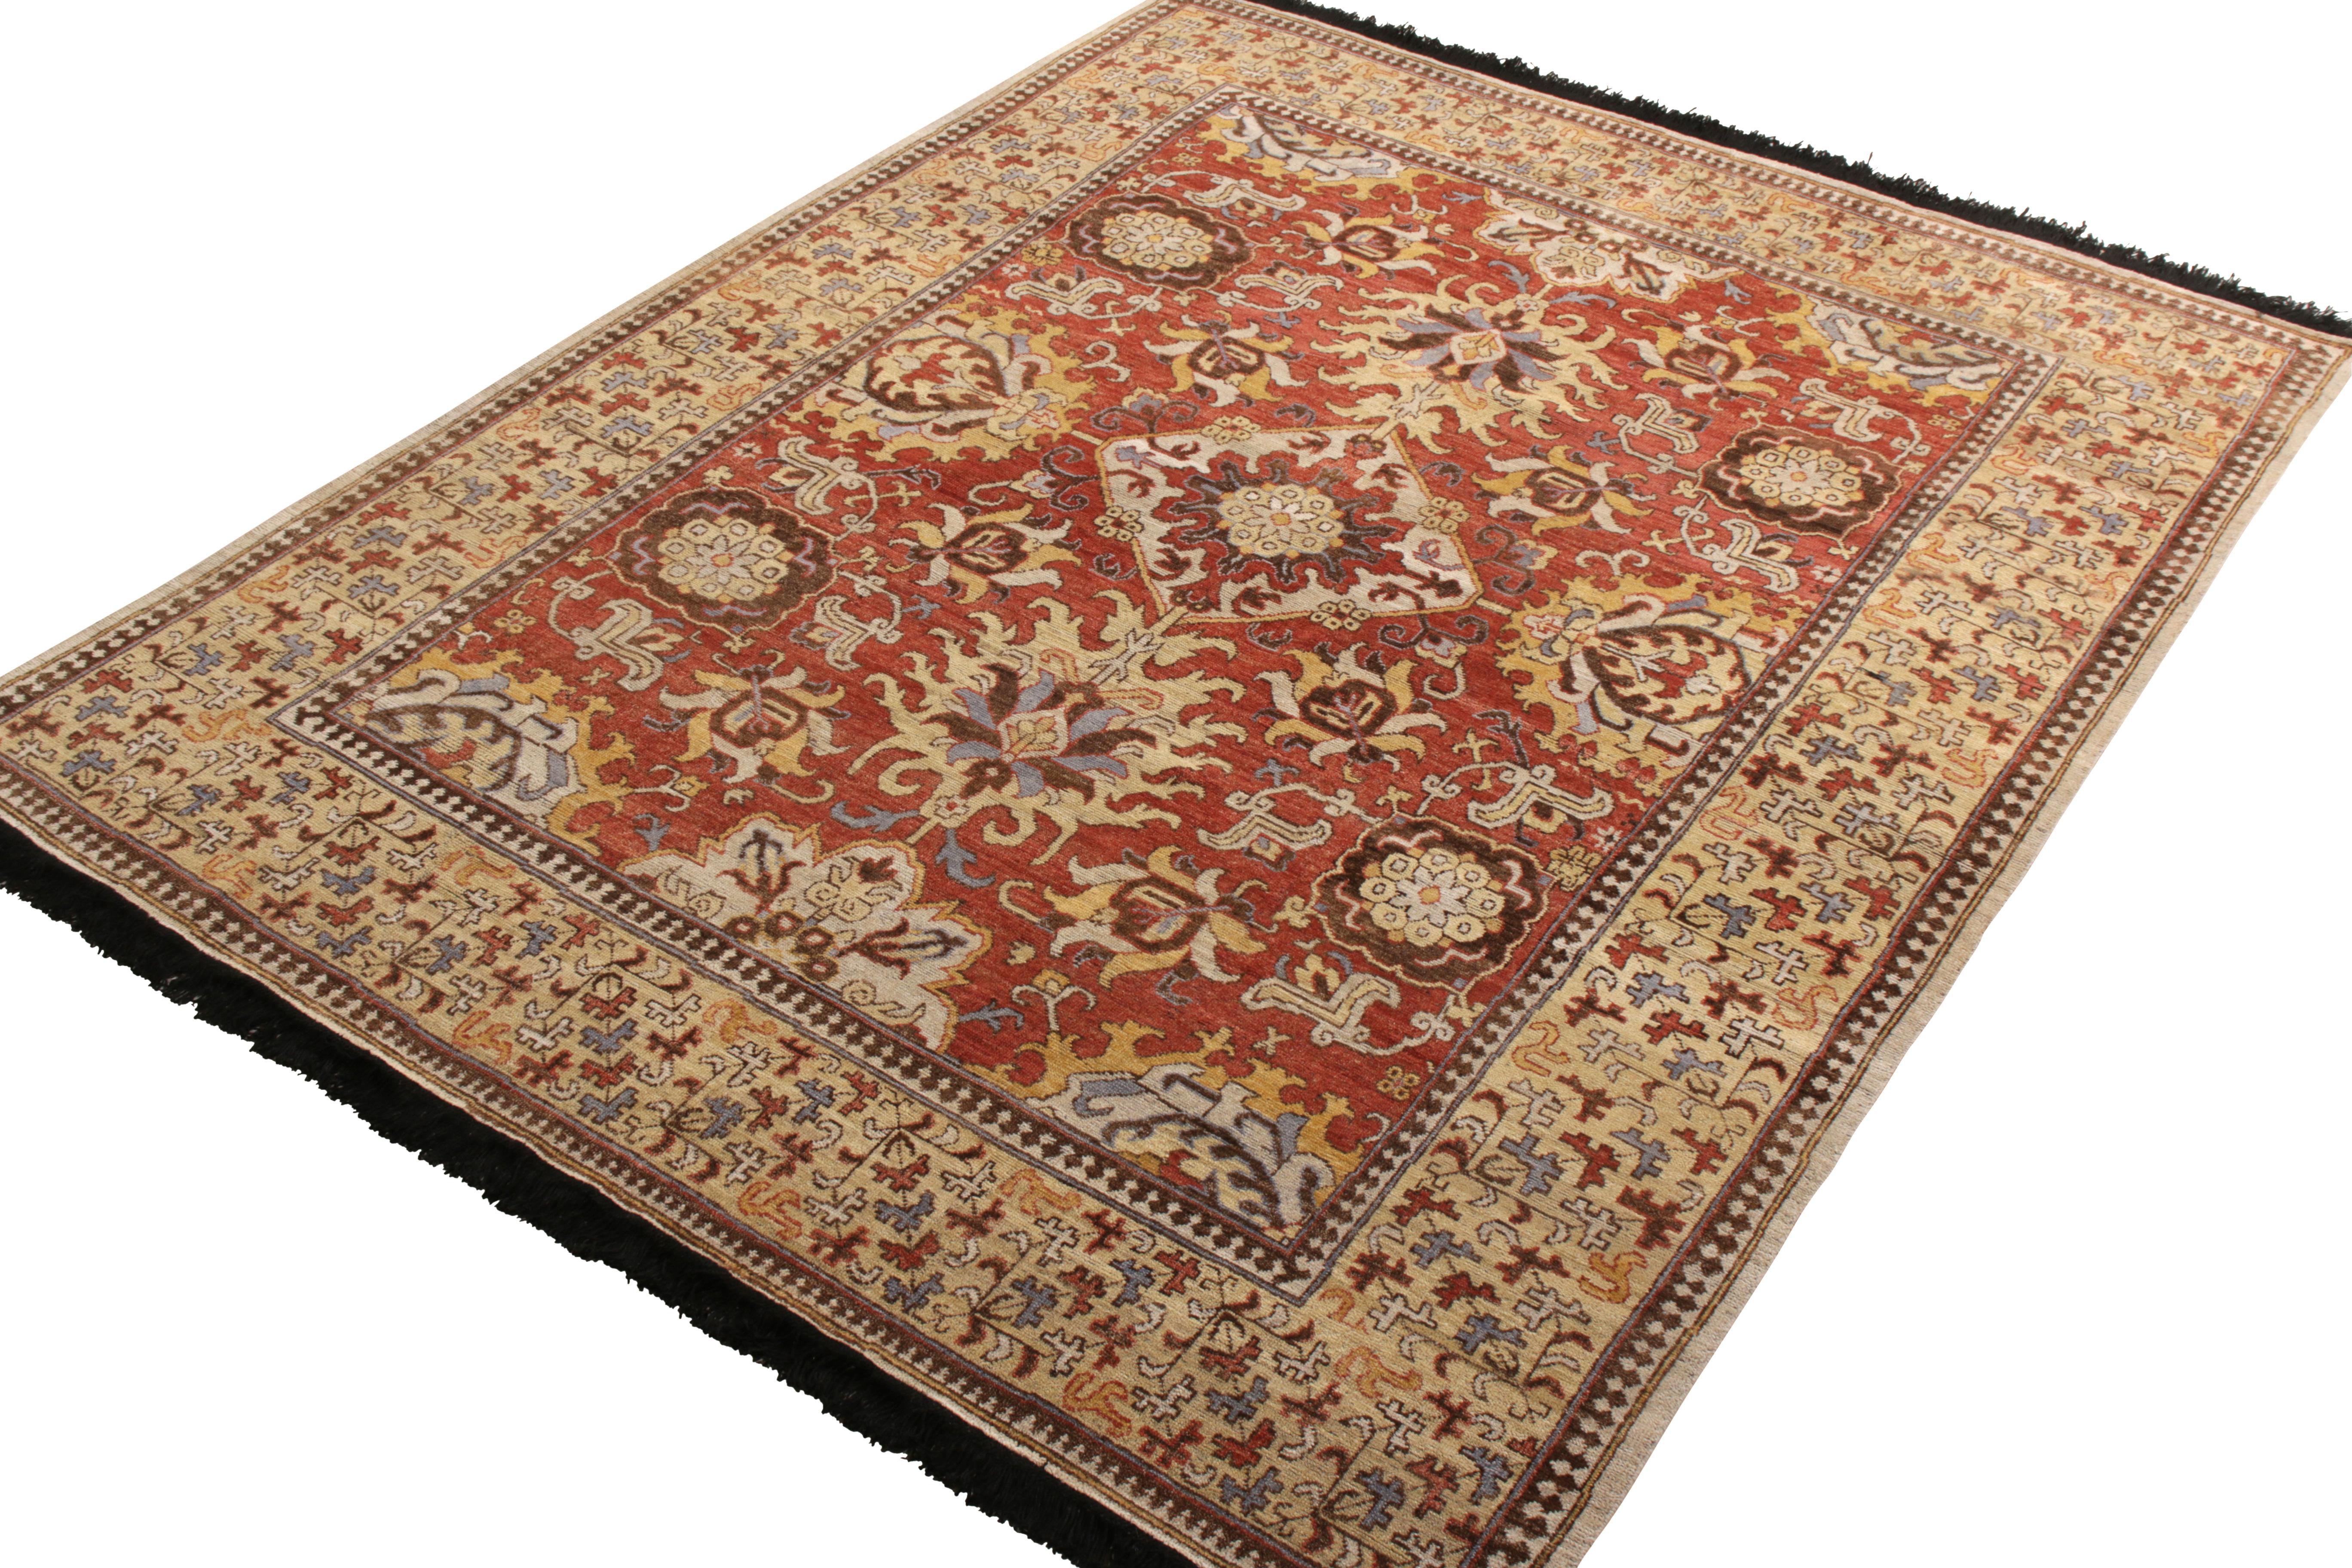 Other Rug & Kilim’s Kuba Style Rug in Red and Beige-Brown Floral Pattern For Sale